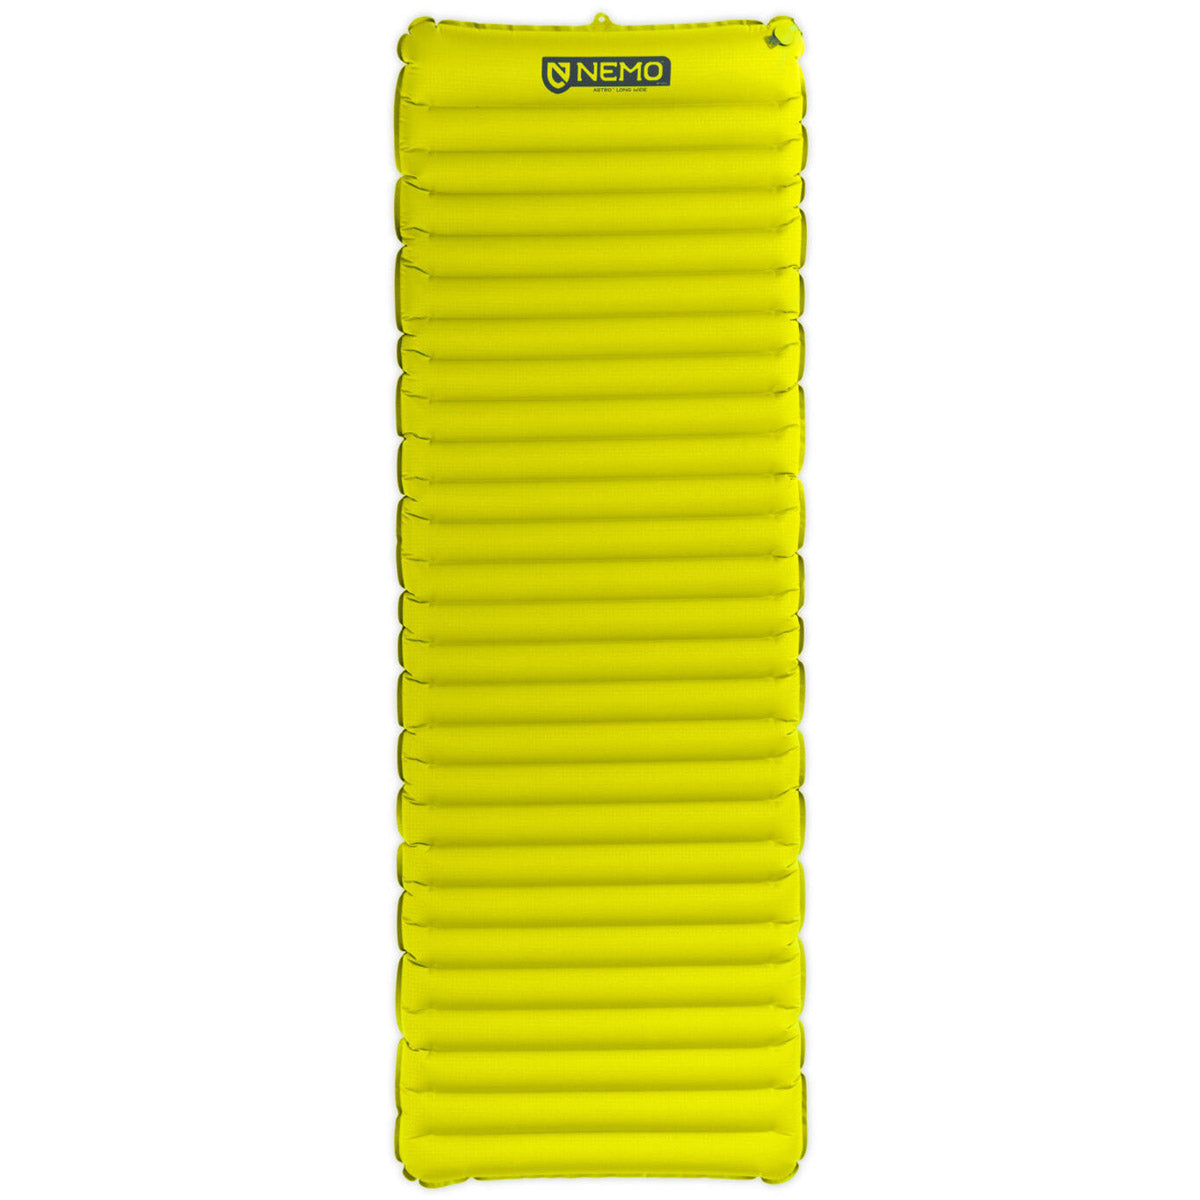 Astro Ultralight Sleeping Pad - Long Wide-NEMO Equipment-Uncle Dan's, Rock/Creek, and Gearhead Outfitters